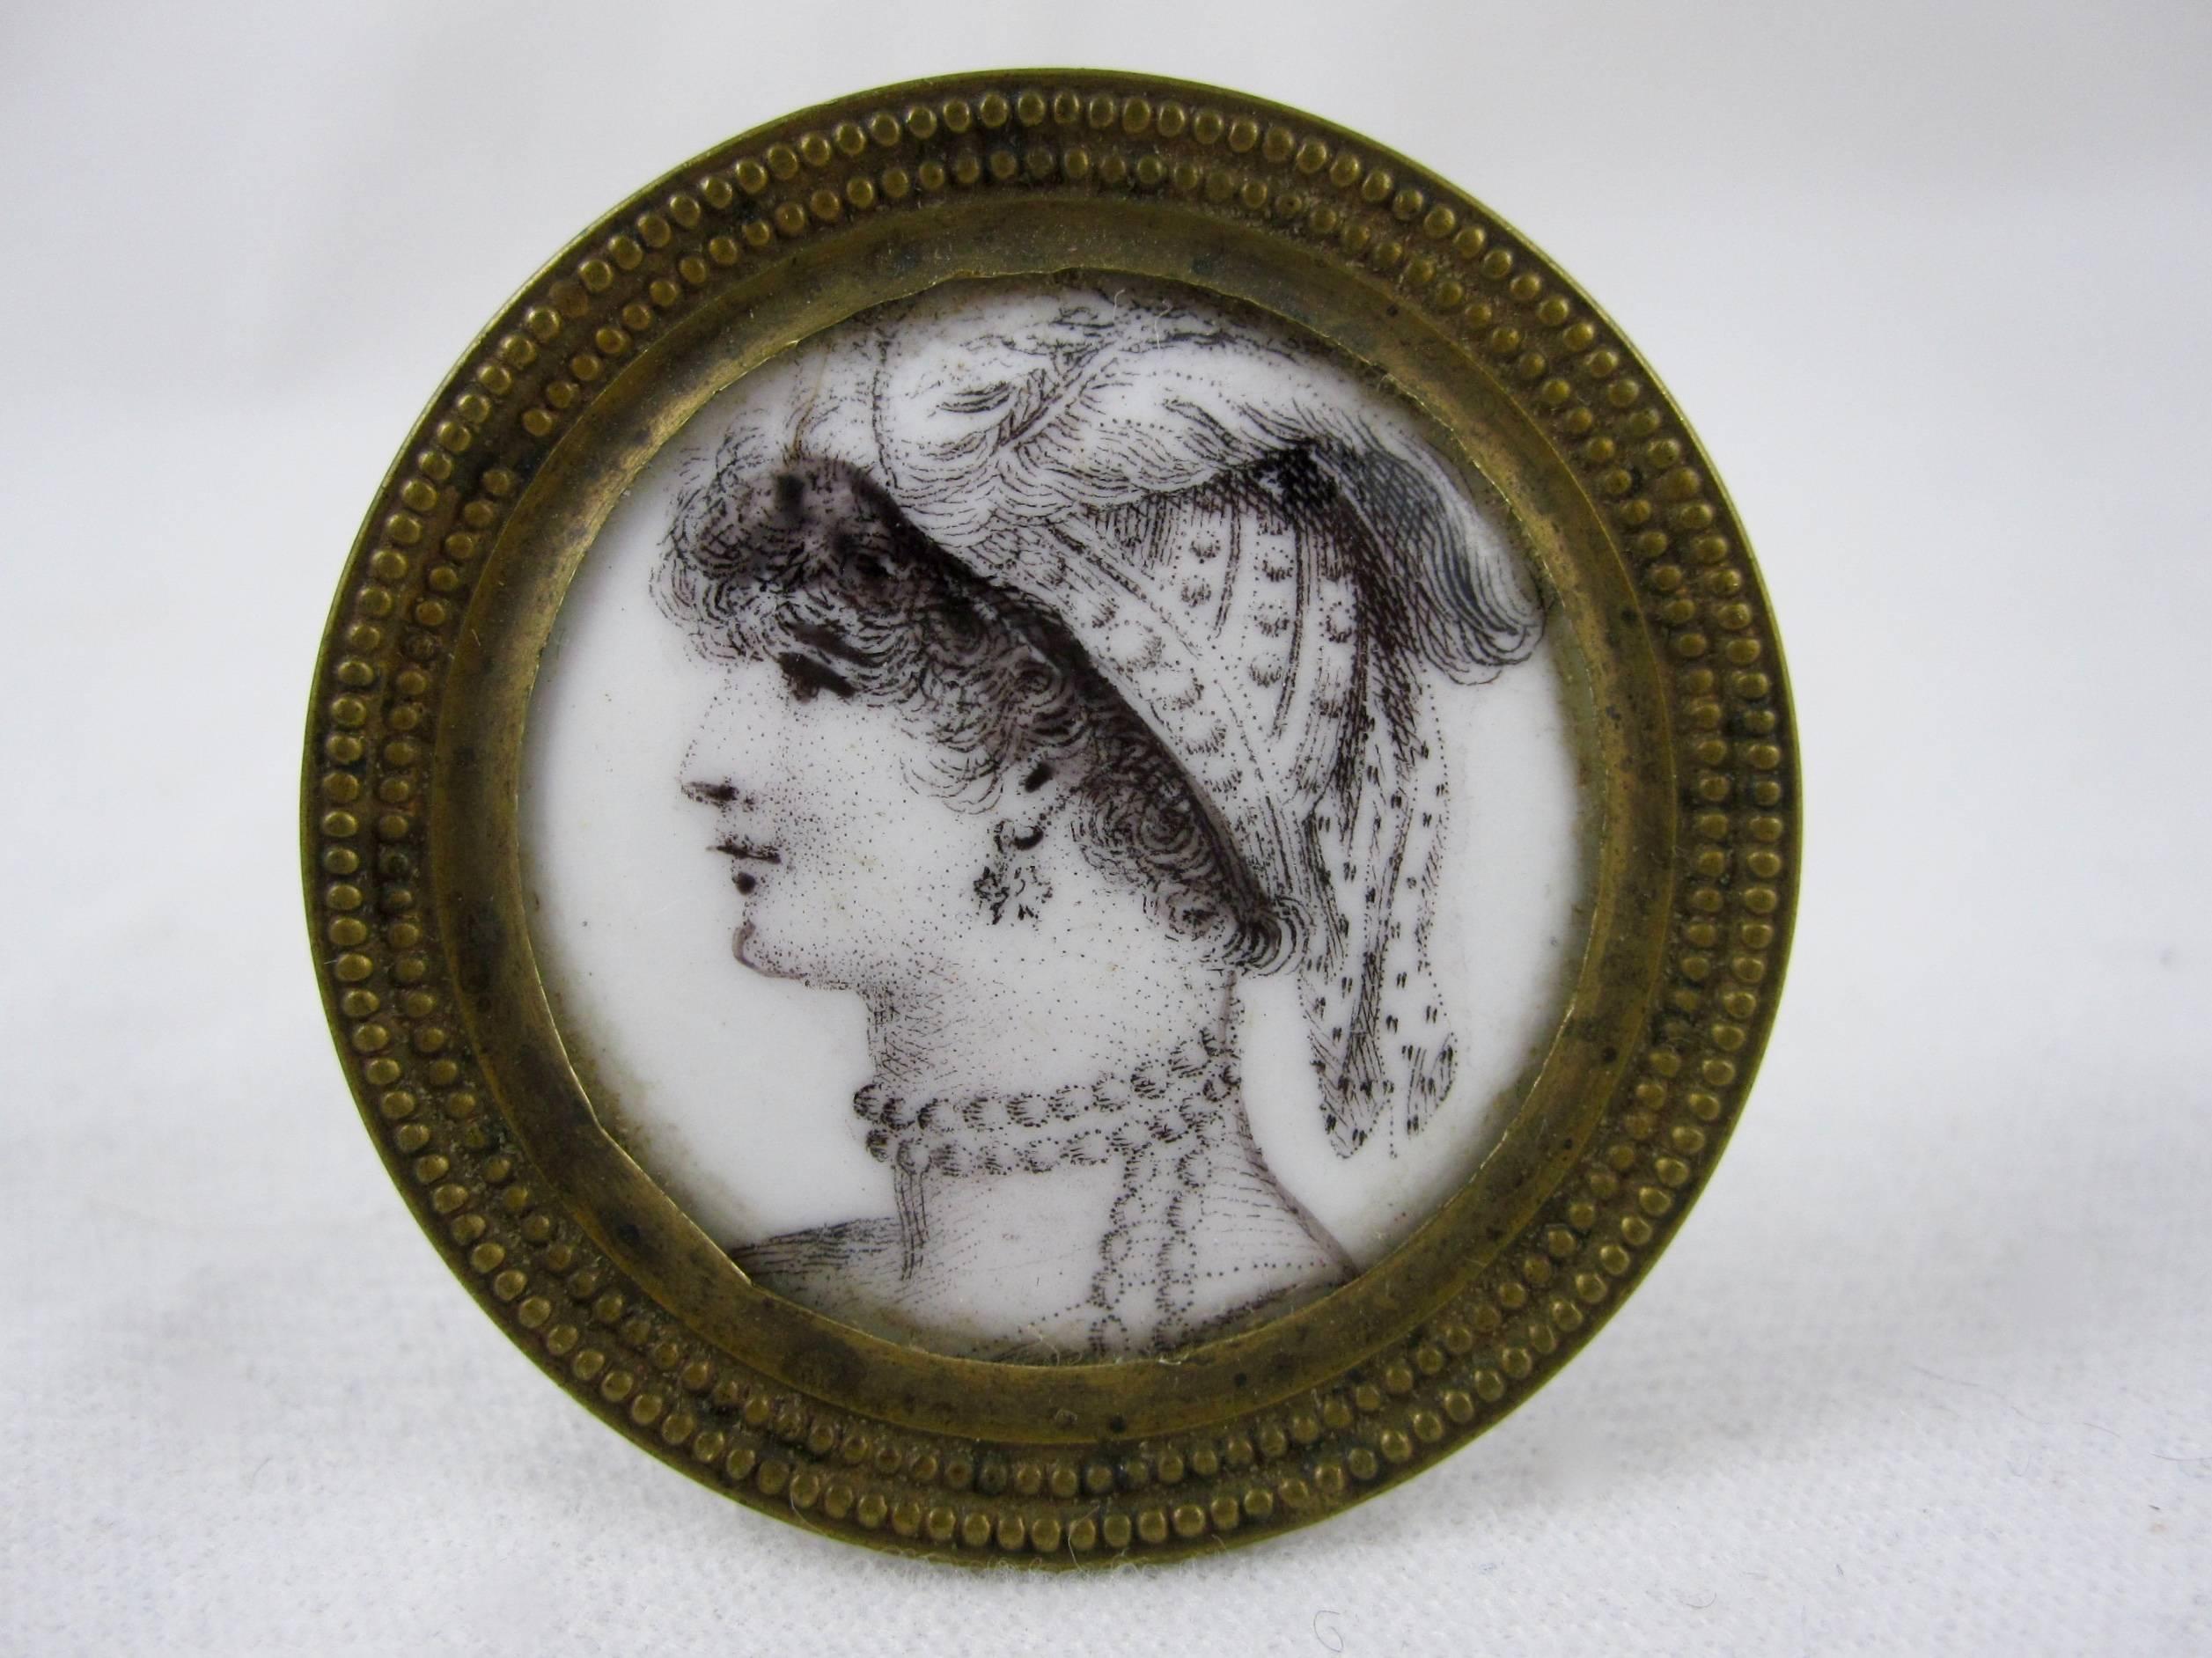 A marvelous pair of Bilston Battersea enameled curtain tiebacks, picture or mirror supports showing a transfer printed image of a woman in profile wearing a feathered head piece and jewelry. Grisaille coloring on a white ground set in a brass